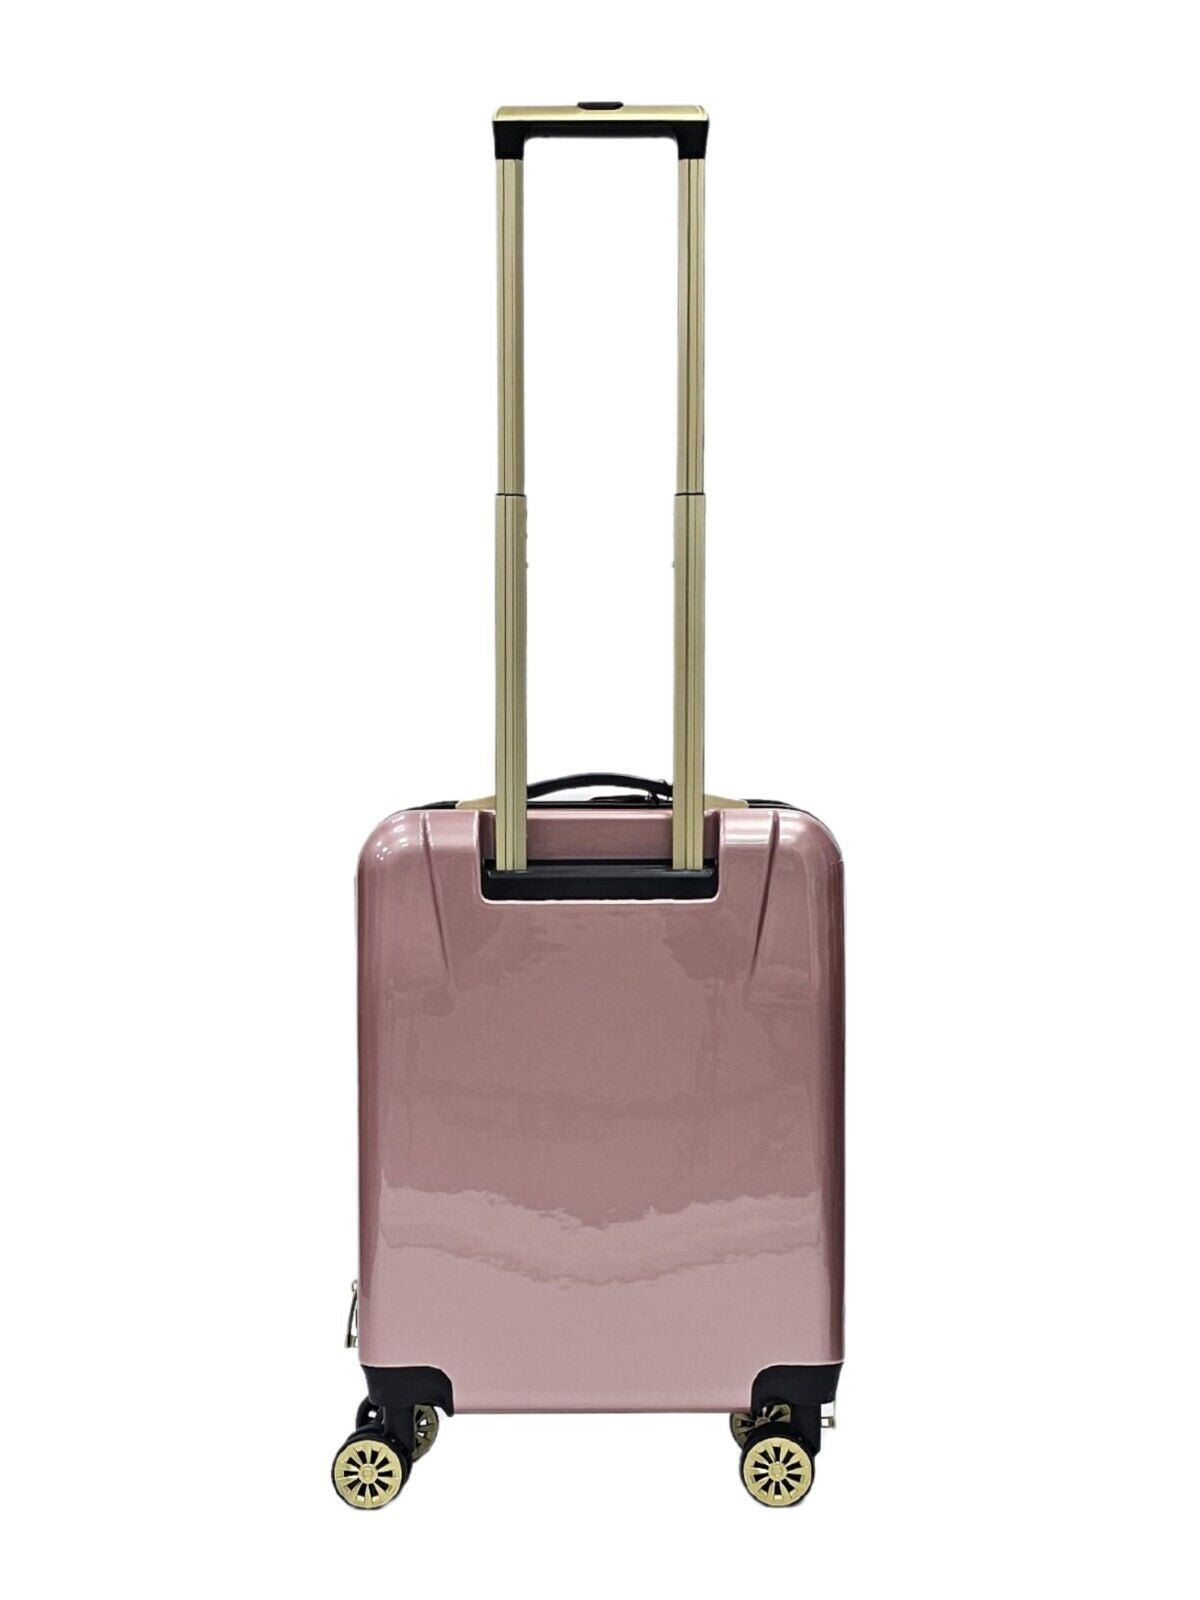 Hard Shell Pink 4 Wheel Suitcase Flower Print Luggage Cabin - Upperclass Fashions 